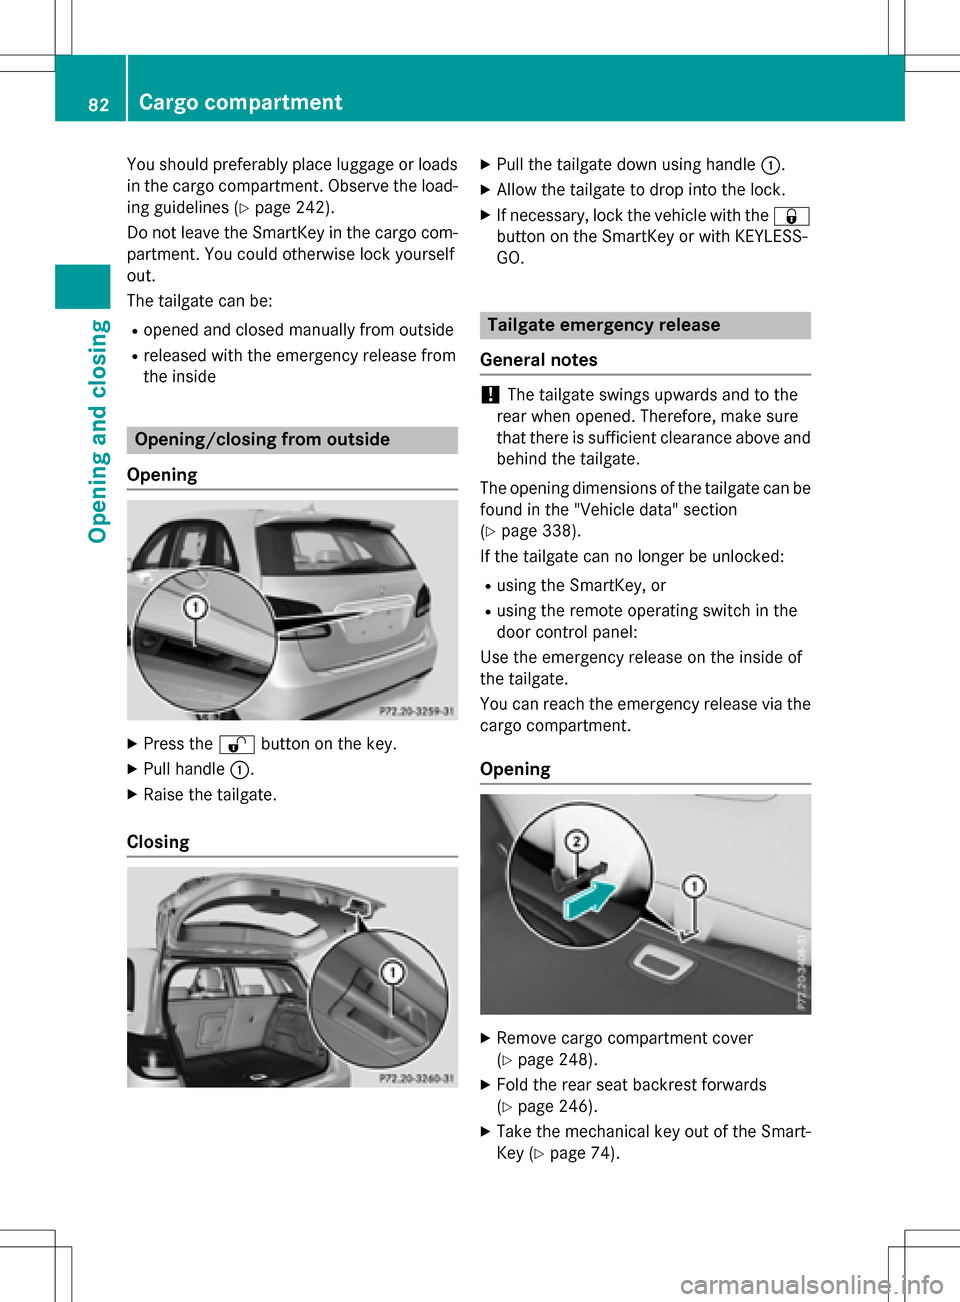 MERCEDES-BENZ B-Class ELECTRIC 2016 W246 Owners Manual You should preferably place luggage or loads
in the cargo compartment. Observe the load-ing guidelines (
Ypage 242).
Do not leave the SmartKey in the cargo com-
partment. You could otherwise lock your